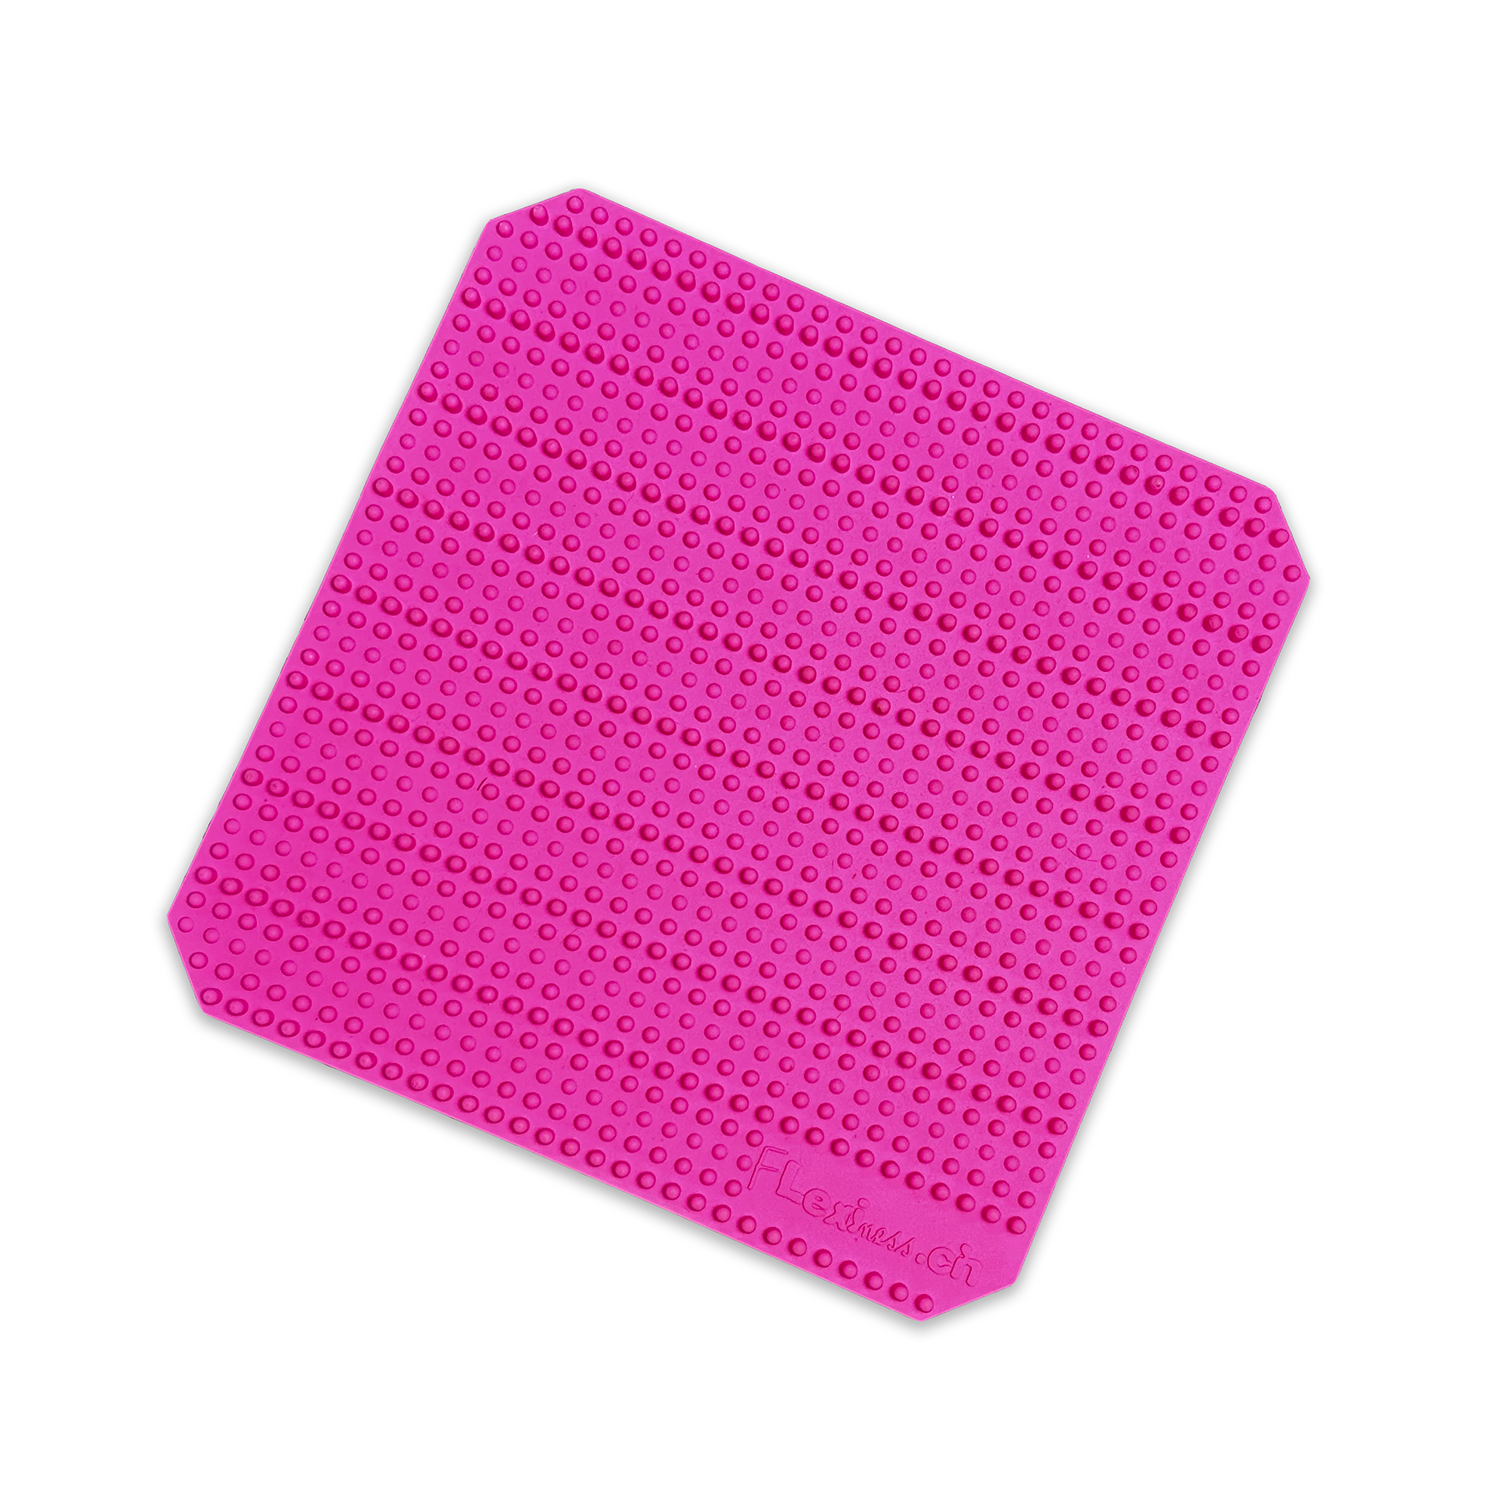 The Flexiness FlexBlox SensiMat, a pink plastic mat with holes on it, designed to provide comfort and support for dogs' paws during exercise with the innovative Your Whole Dog technology.